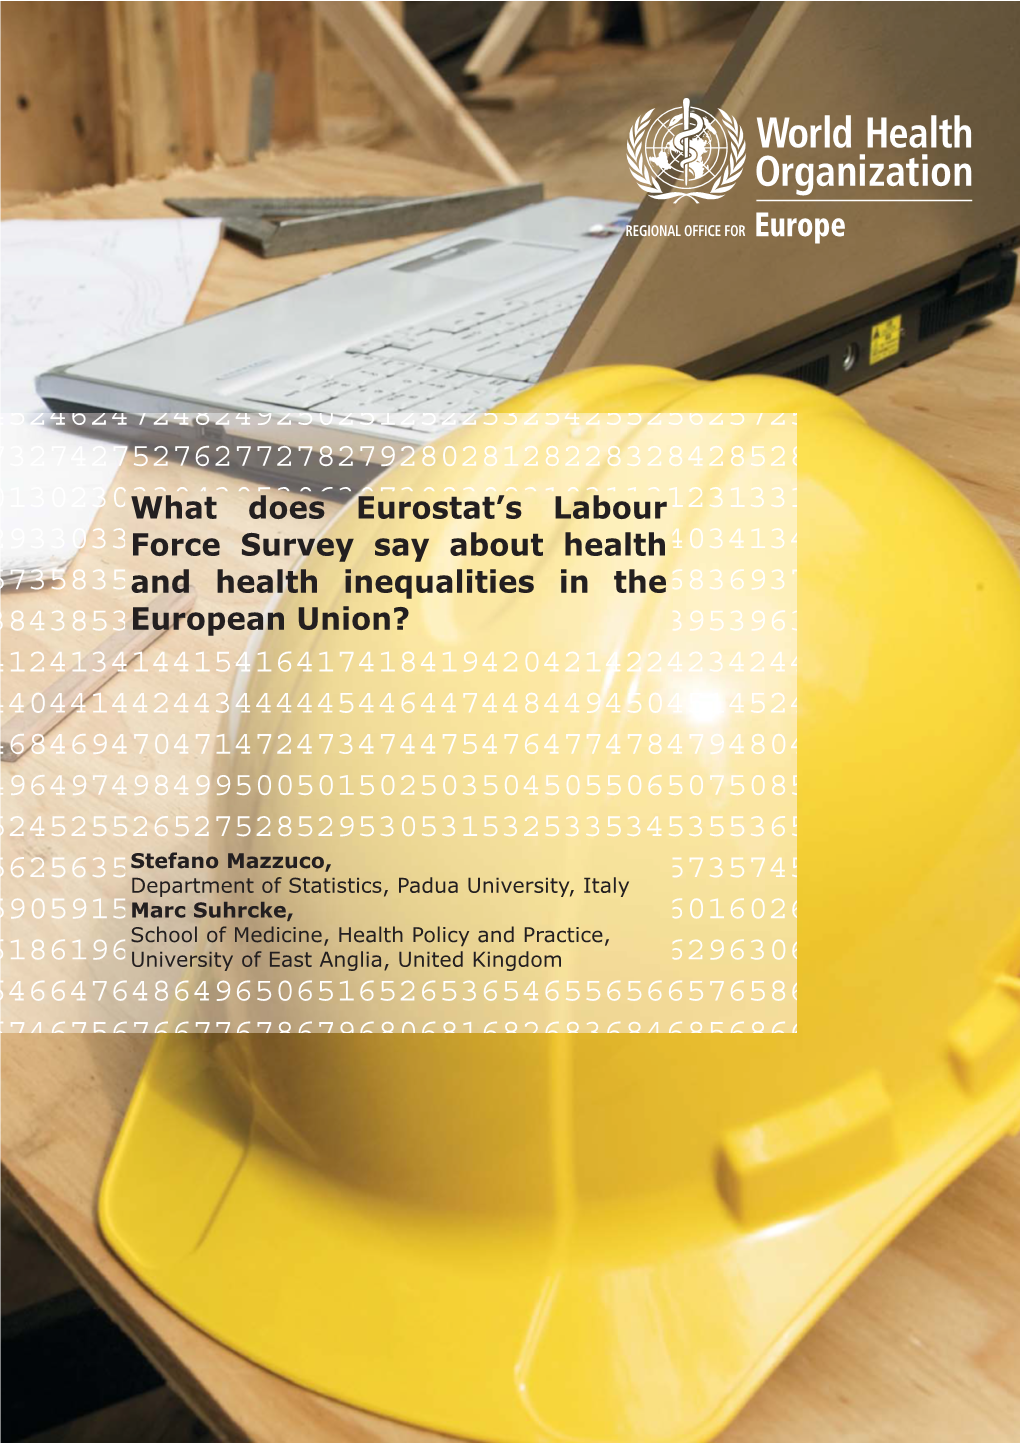 What Does Eurostat's Labour Force Survey Say About Health and Health Inequalities in the European Union?